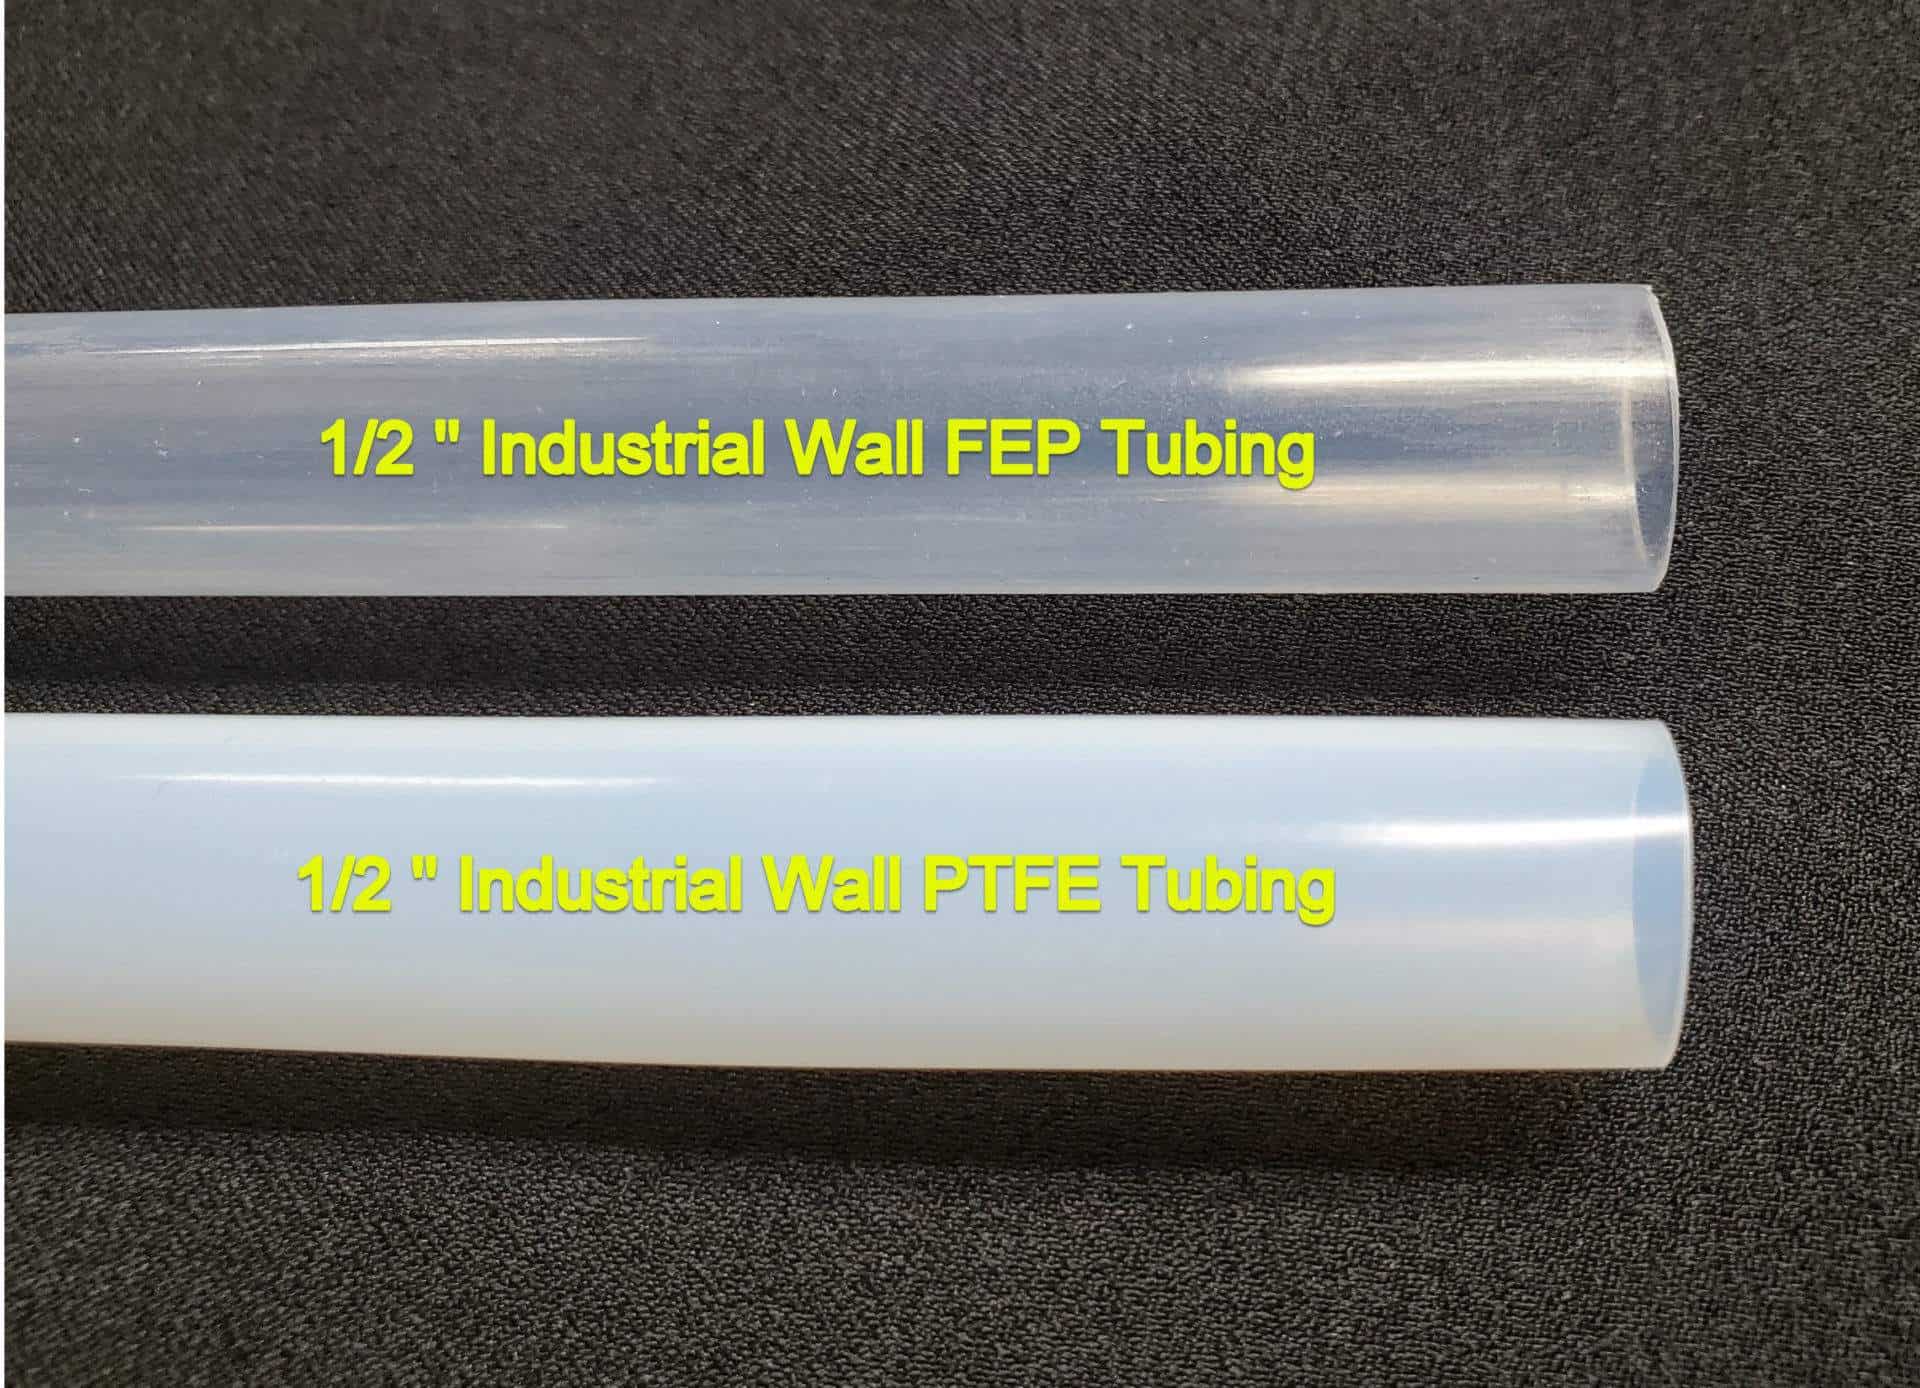 Difference Between PFA and PTFE